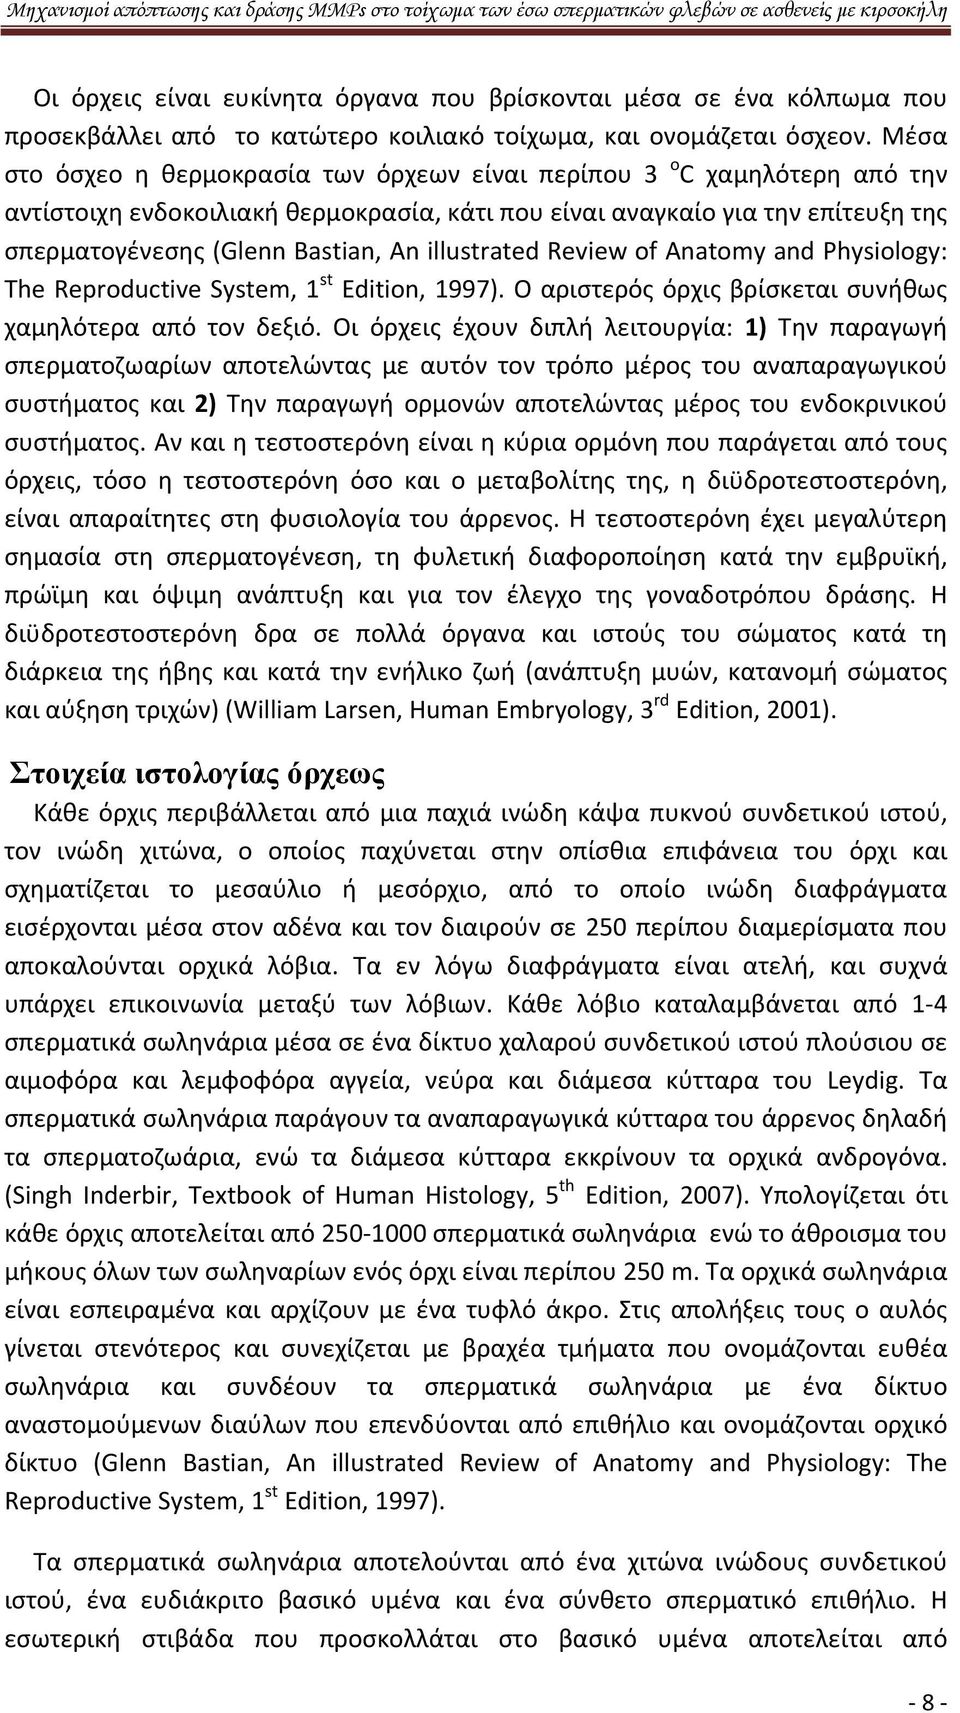 illustrated Review of Anatomy and Physiology: Τhe Reproductive System, 1 st Edition, 1997). Ο αριστερός όρχις βρίσκεται συνήθως χαμηλότερα από τον δεξιό.